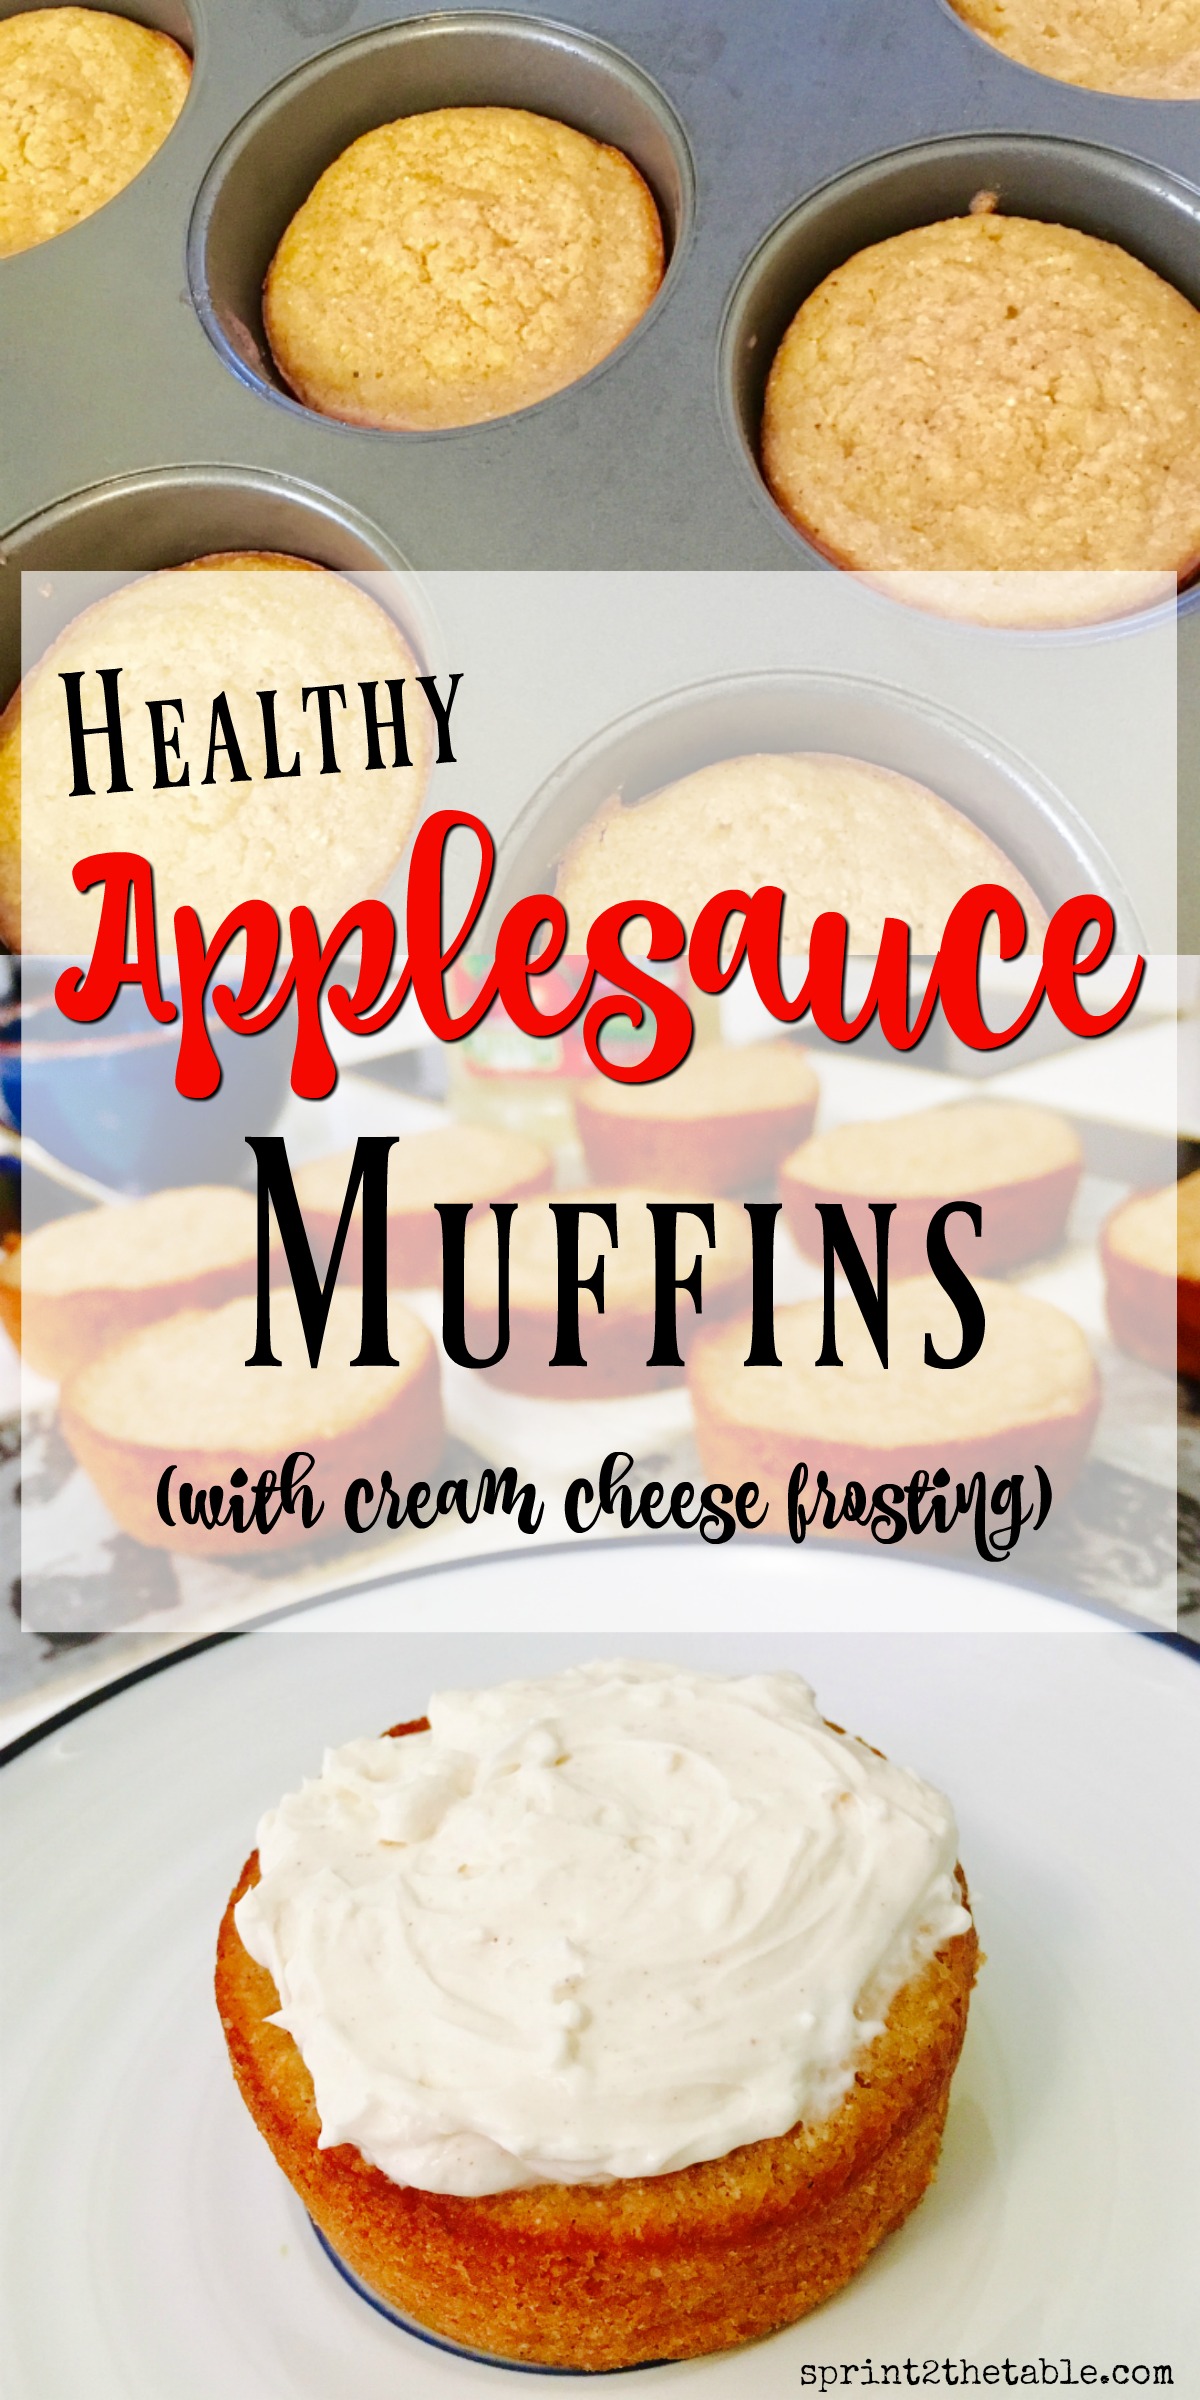 These healthy Applesauce Muffins are perfect for busy mornings. Their cream cheese frosting makes you feel like you're eating cake for breakfast!